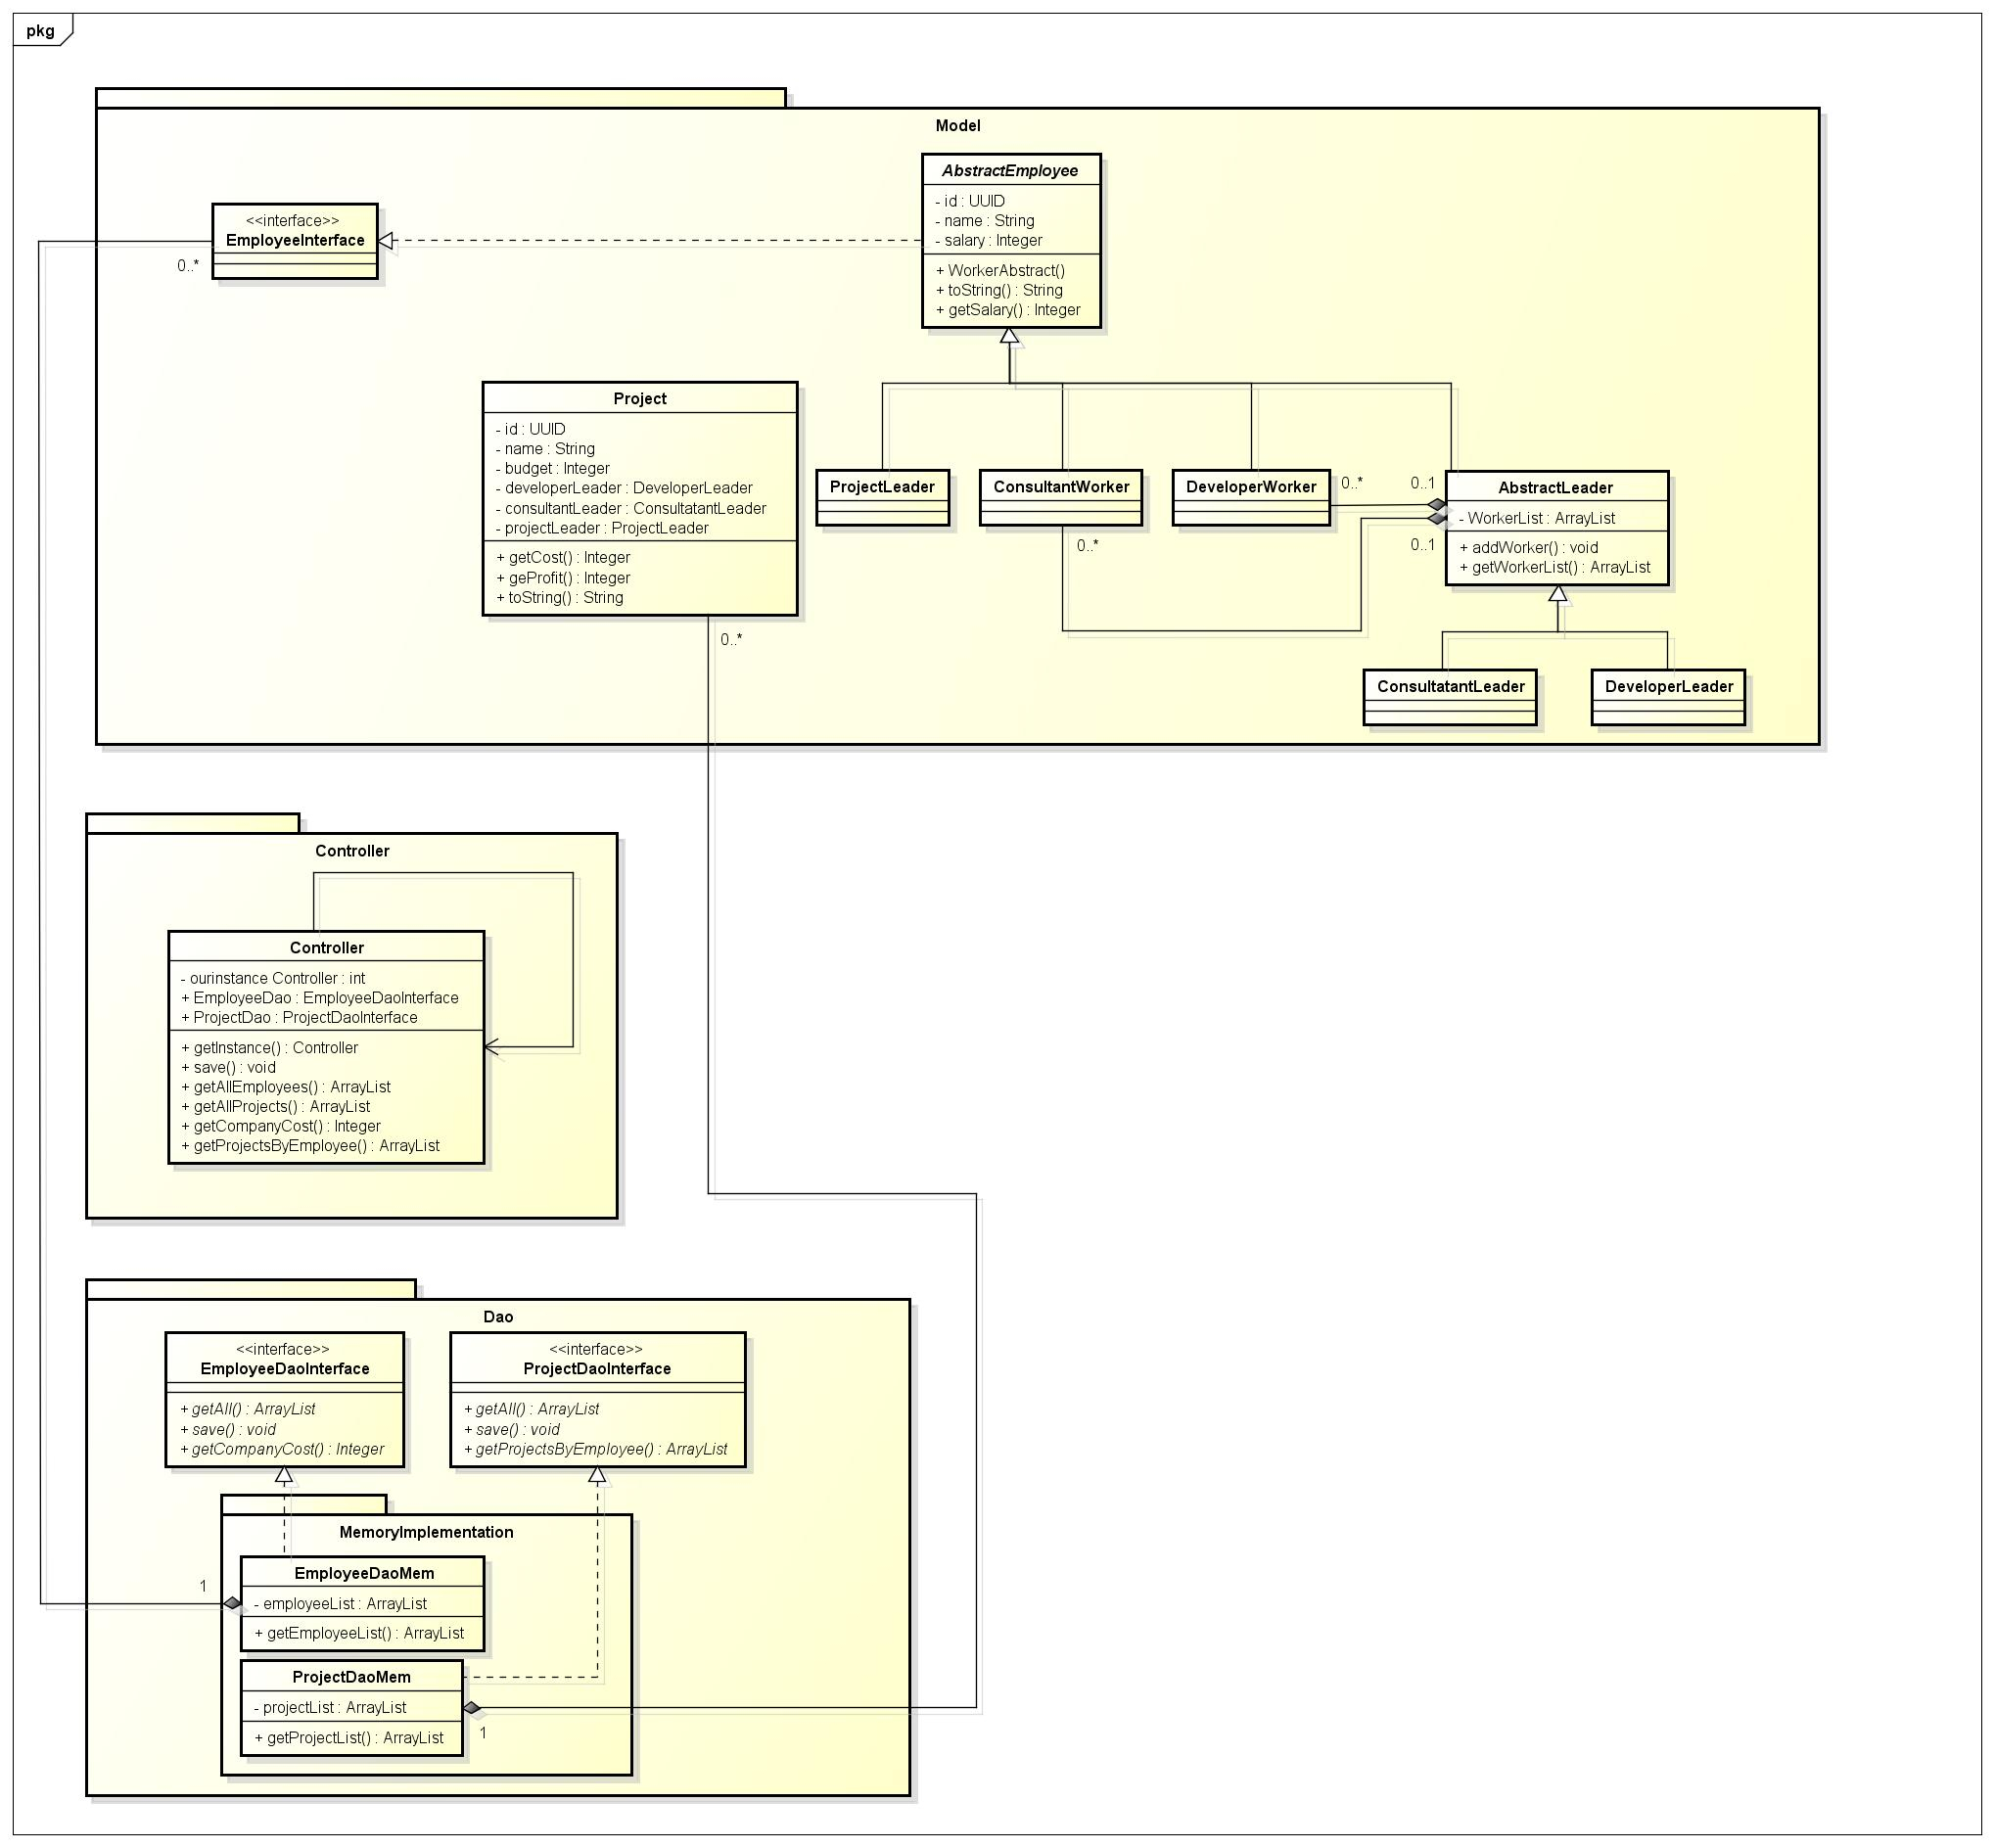 Uml Class Diagram What Is The Right Way To Represent A Controller In A Uml Class